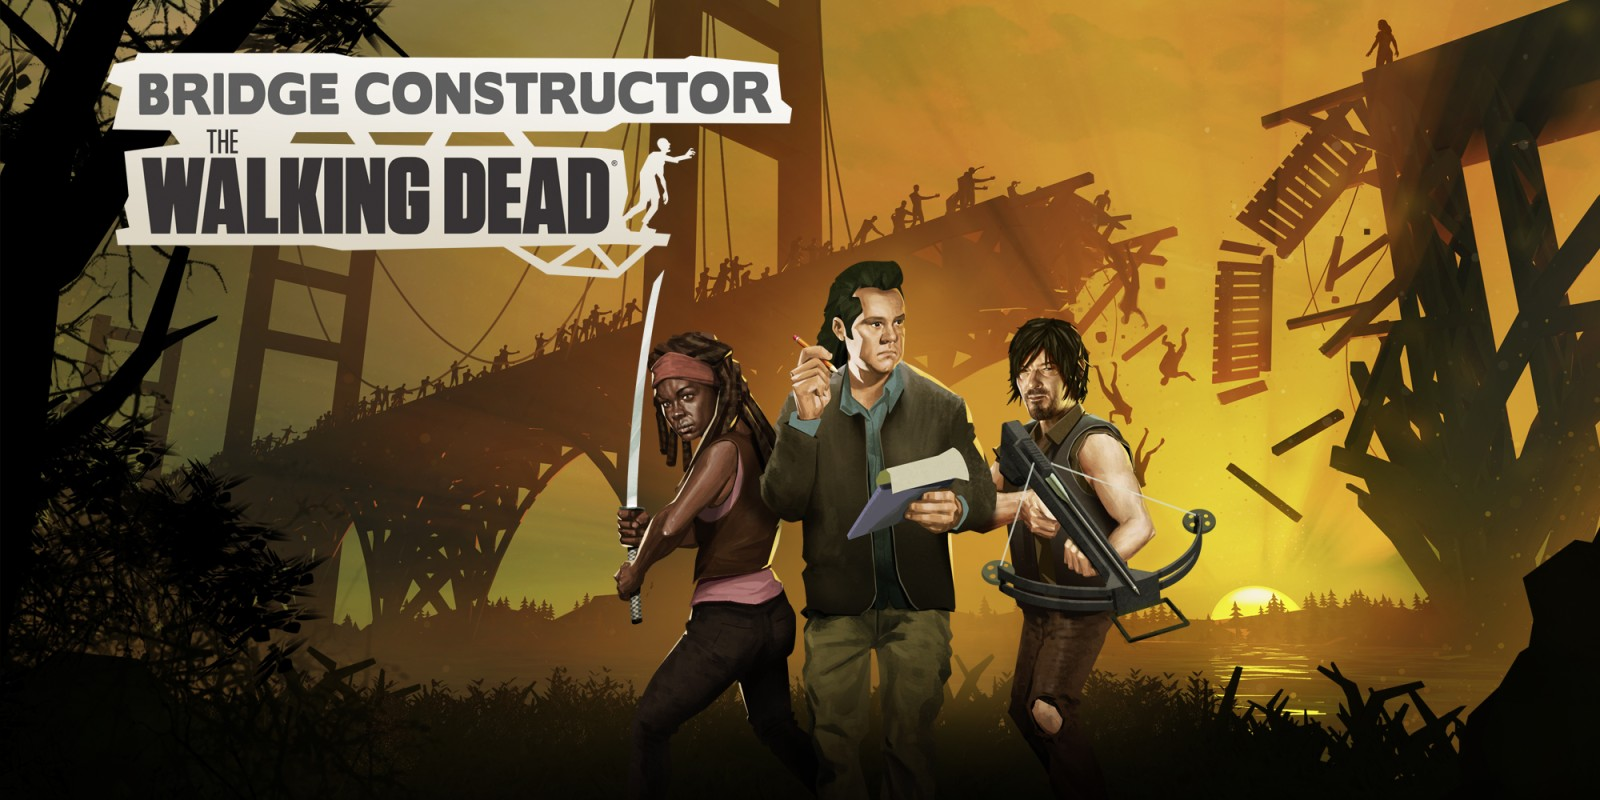 [Epic Games Store] Bridge Constructor: The Walking Dead and Ironcast - Computer games, Epic Games, Epic Games Launcher, Epic Games Store, Not Steam, Freebie